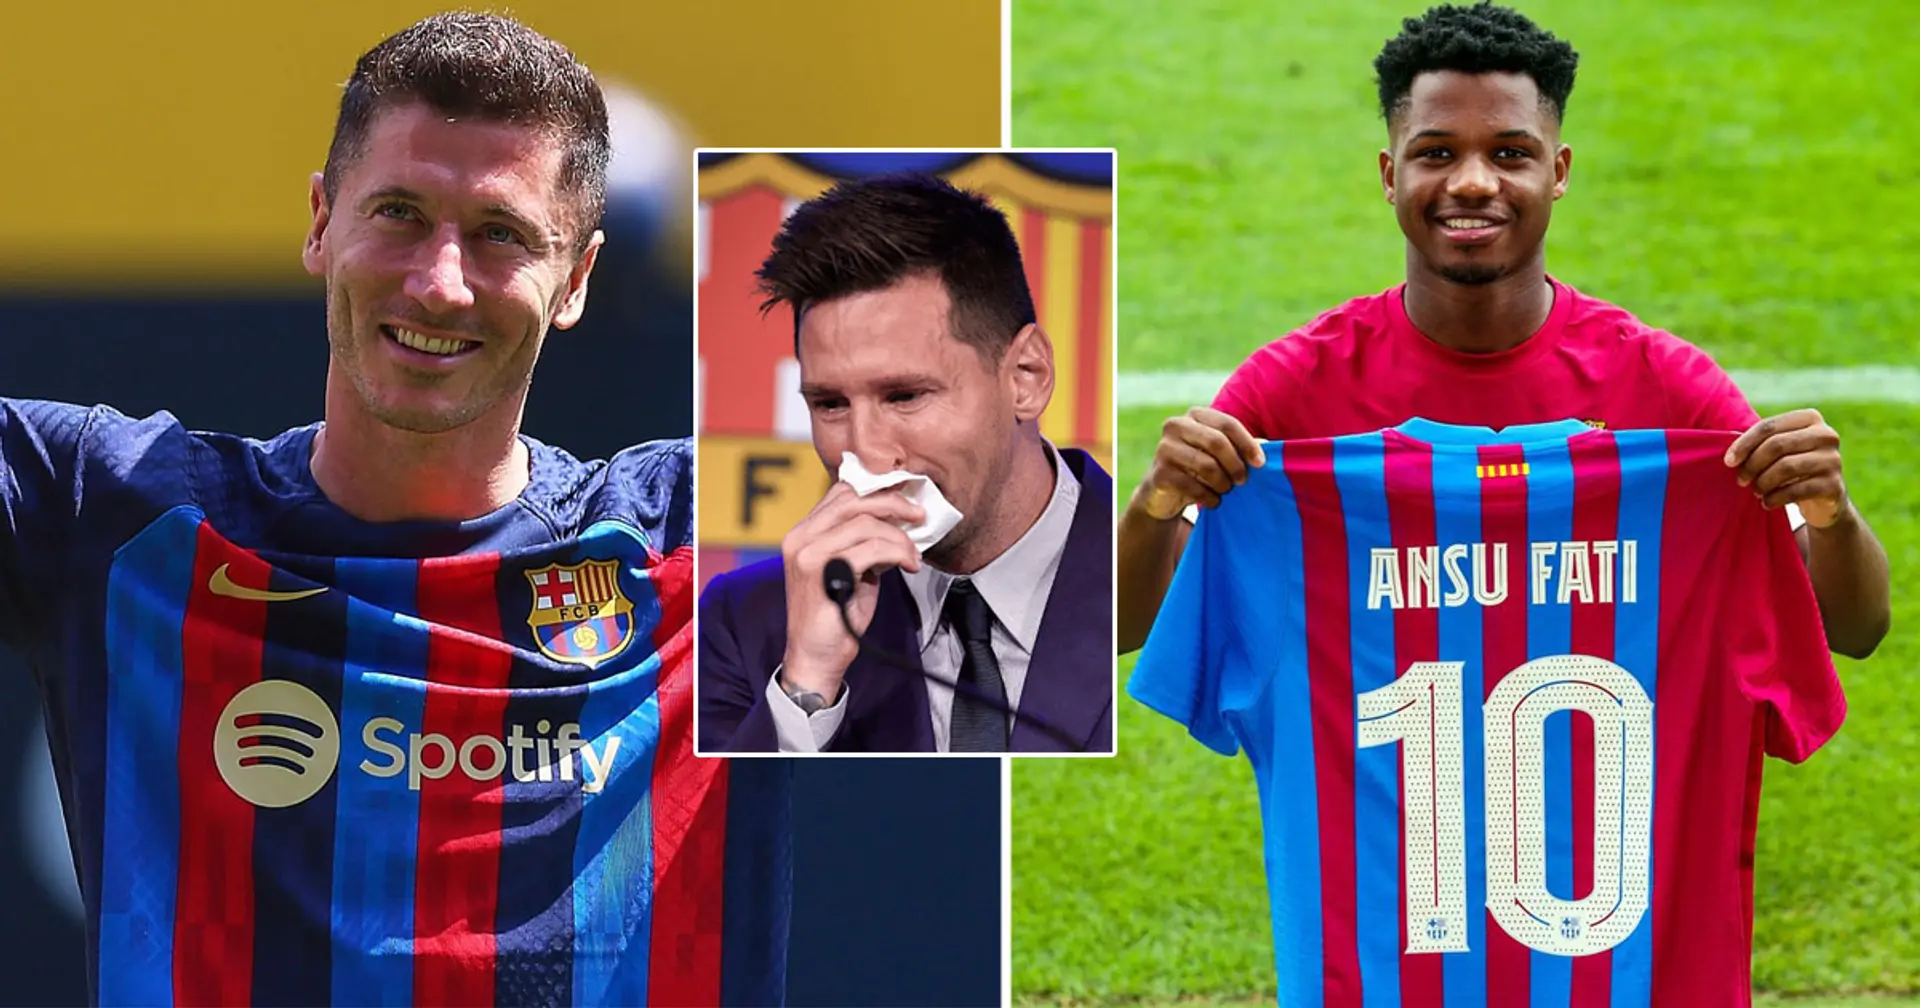 In pics: One year without Leo Messi at Barca